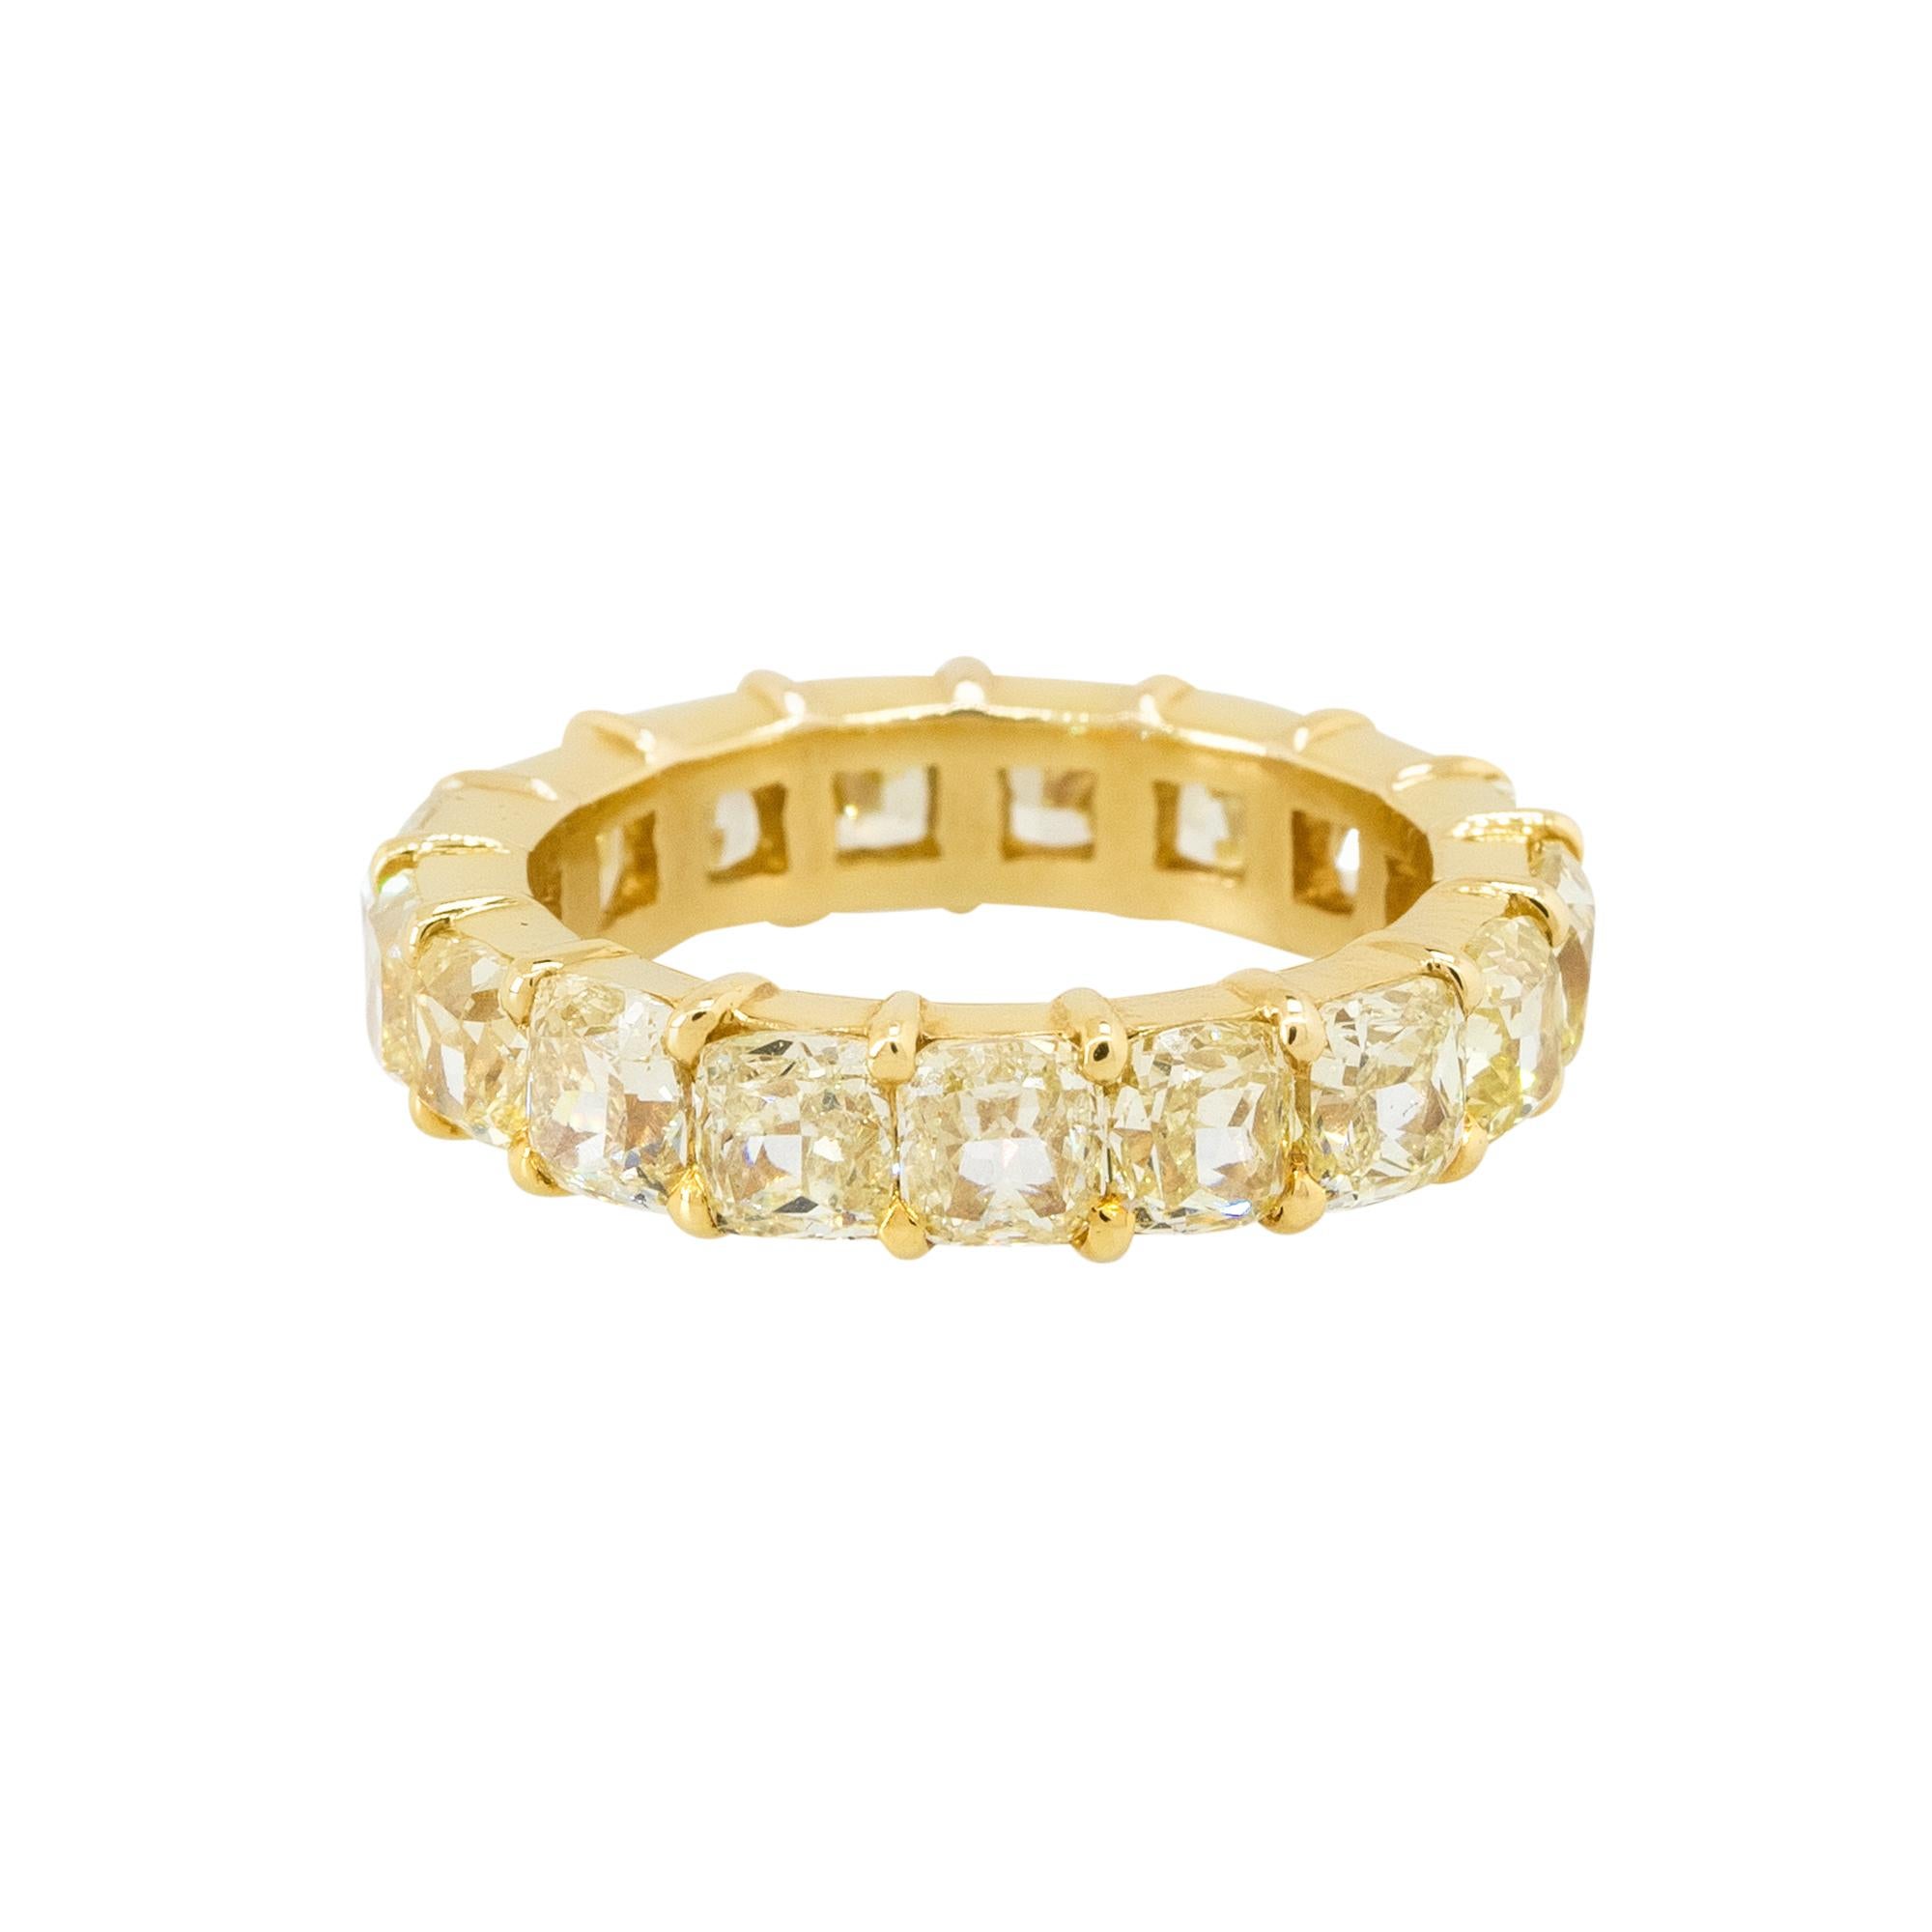 Material: 18k Yellow Gold
Diamond Details: Approx. 6.79ctw of cushion cut Diamonds. Diamonds are Fancy Yellow in color and VS in clarity
Total weight: 5.9g (3.8dwt)
Measurements: 23mm x 23mm x 5mm
Size: 6.25 
Additional details: This item comes with